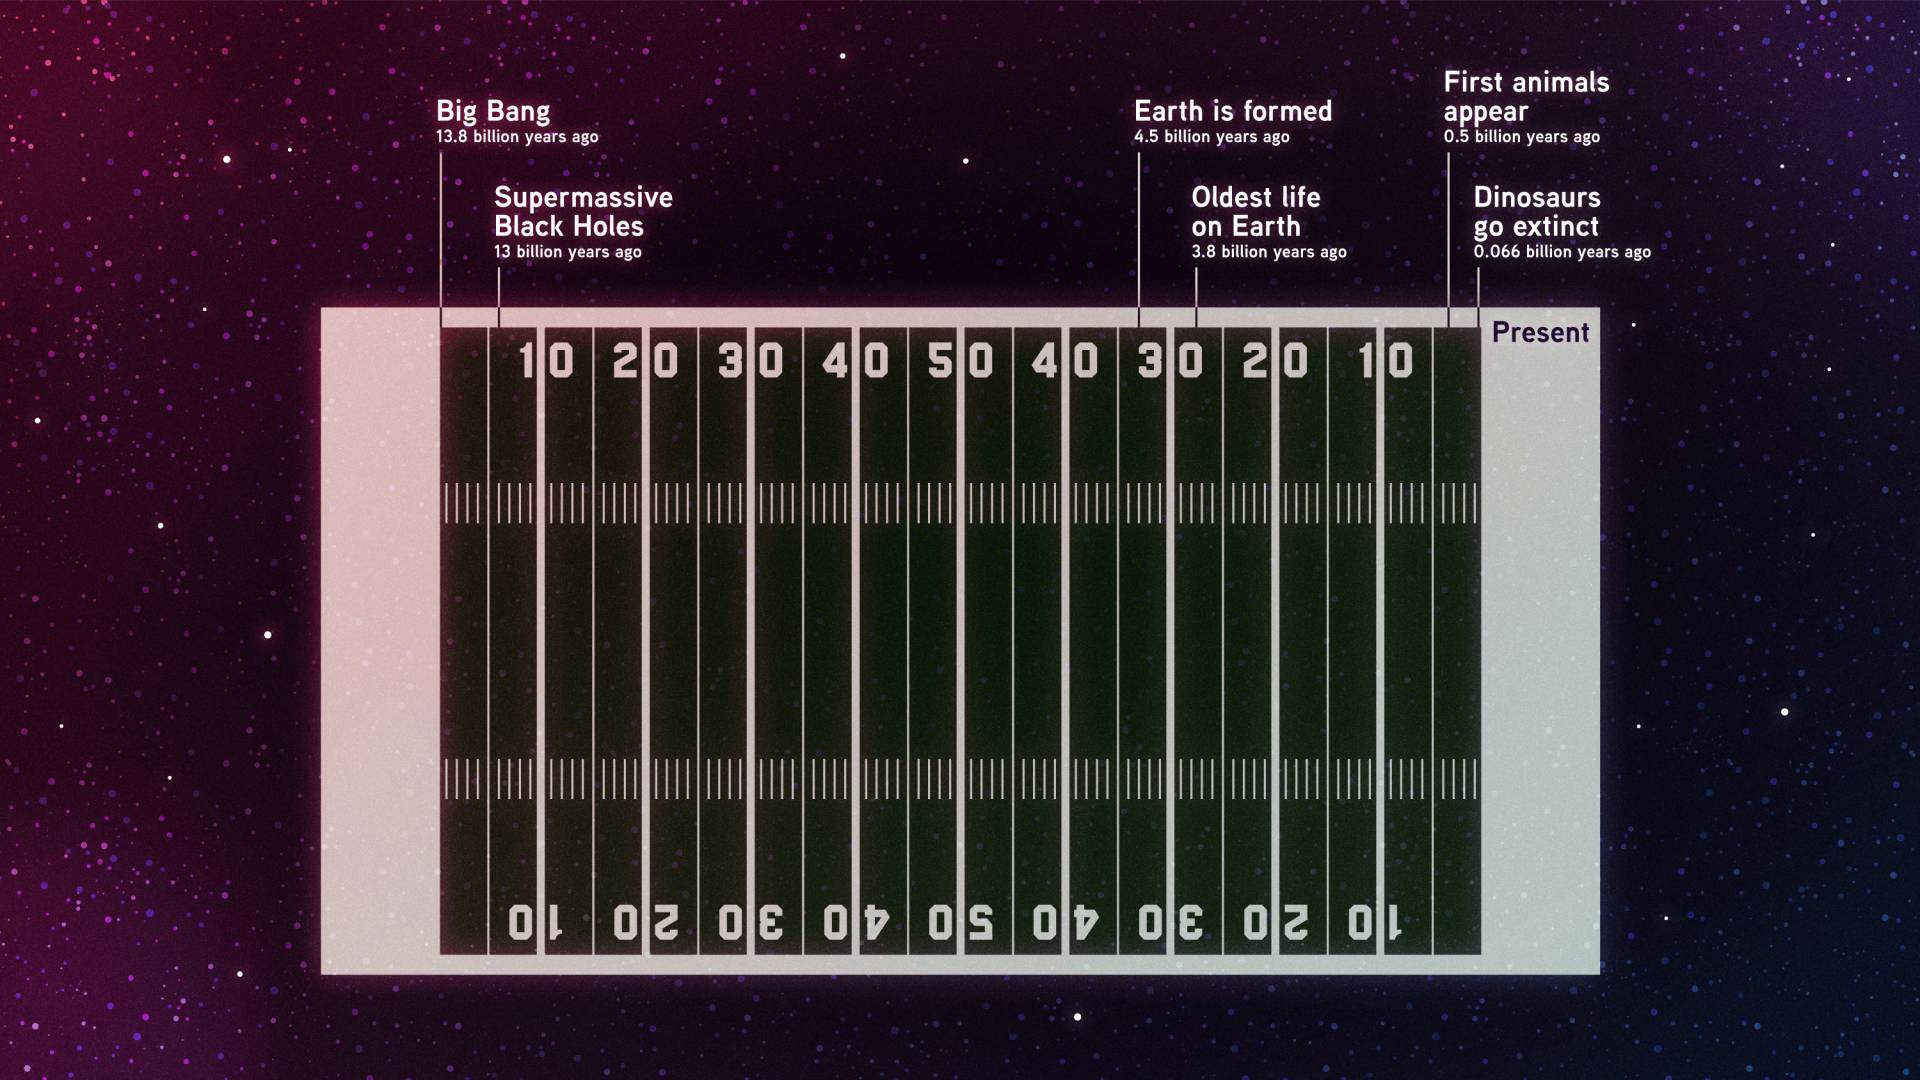 The history of the universe represented as a football field